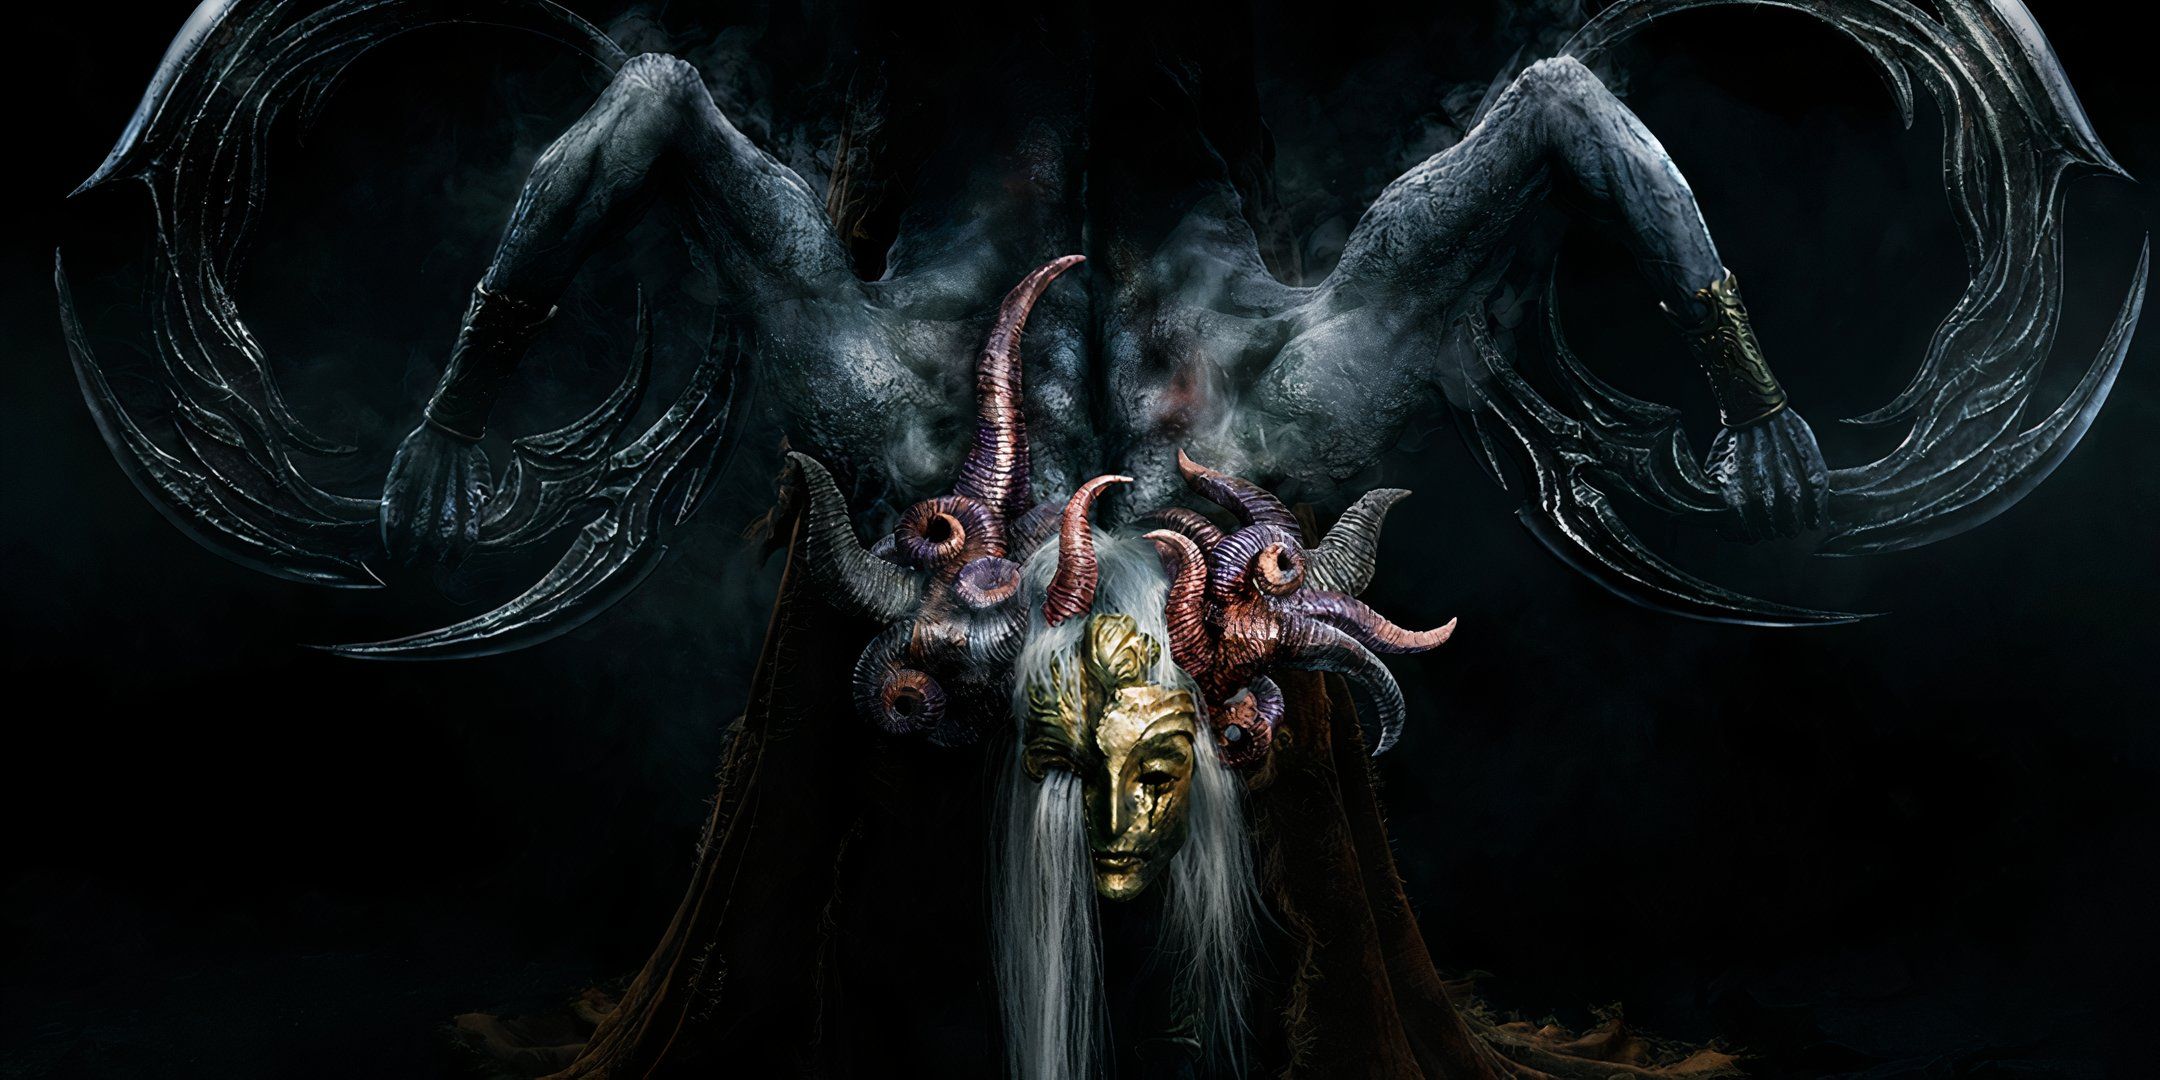 A new enemy in Elden Ring. It is posed in such as way that it resembles a uterus. It has grey hair coming through a golden mask, and is bending over while displaying two circular weapons. 